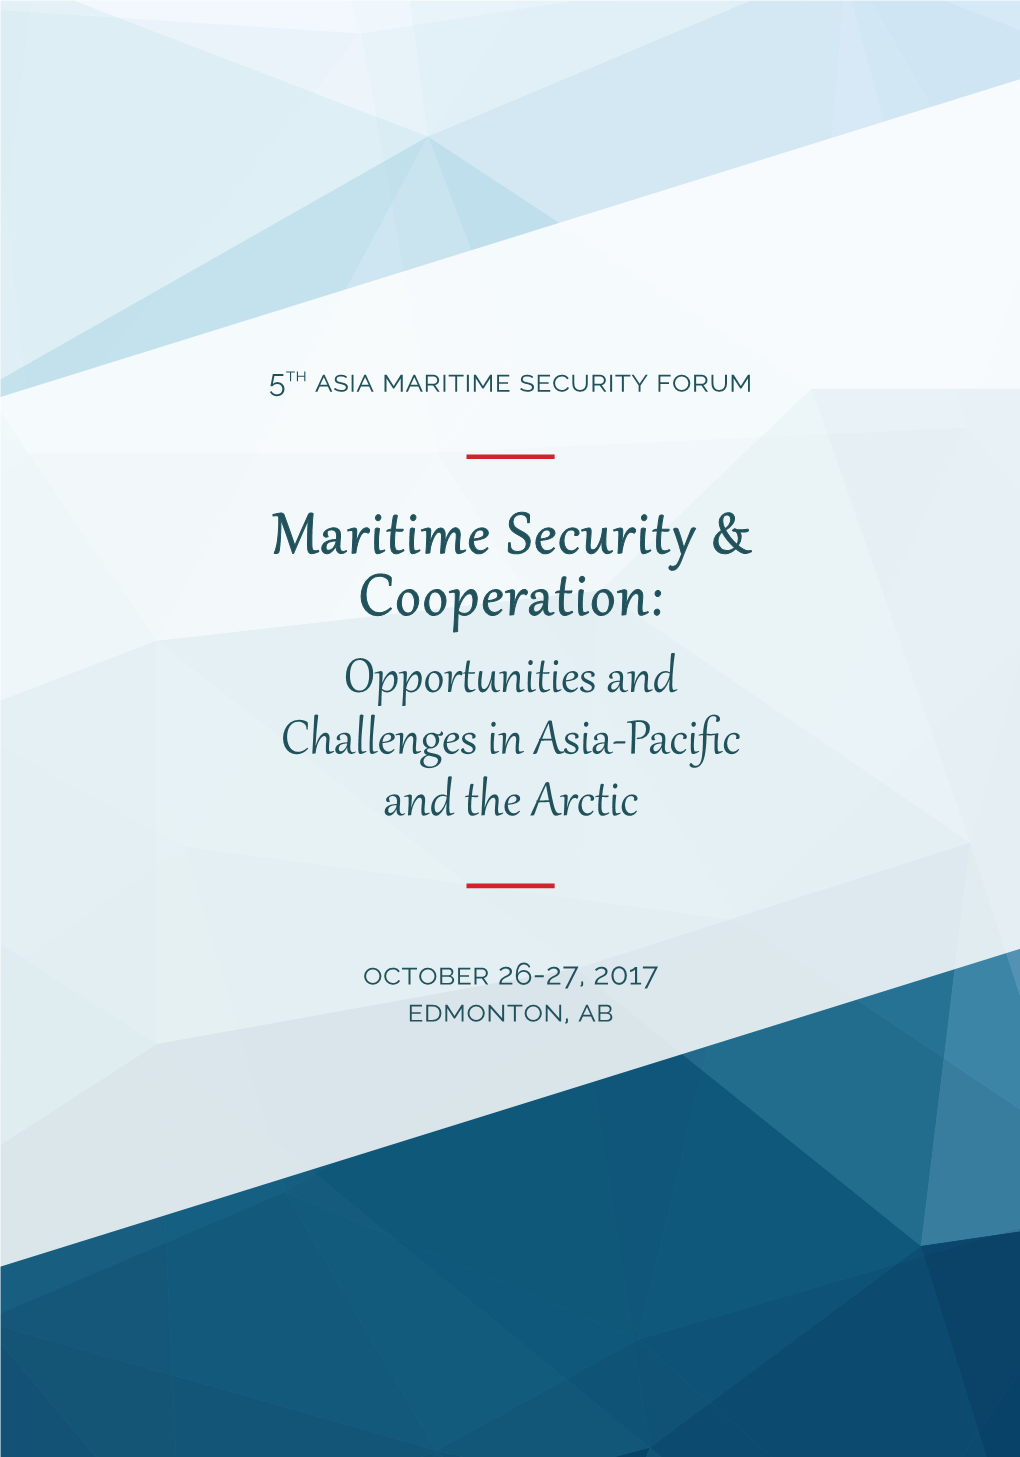 Maritime Security & Cooperation